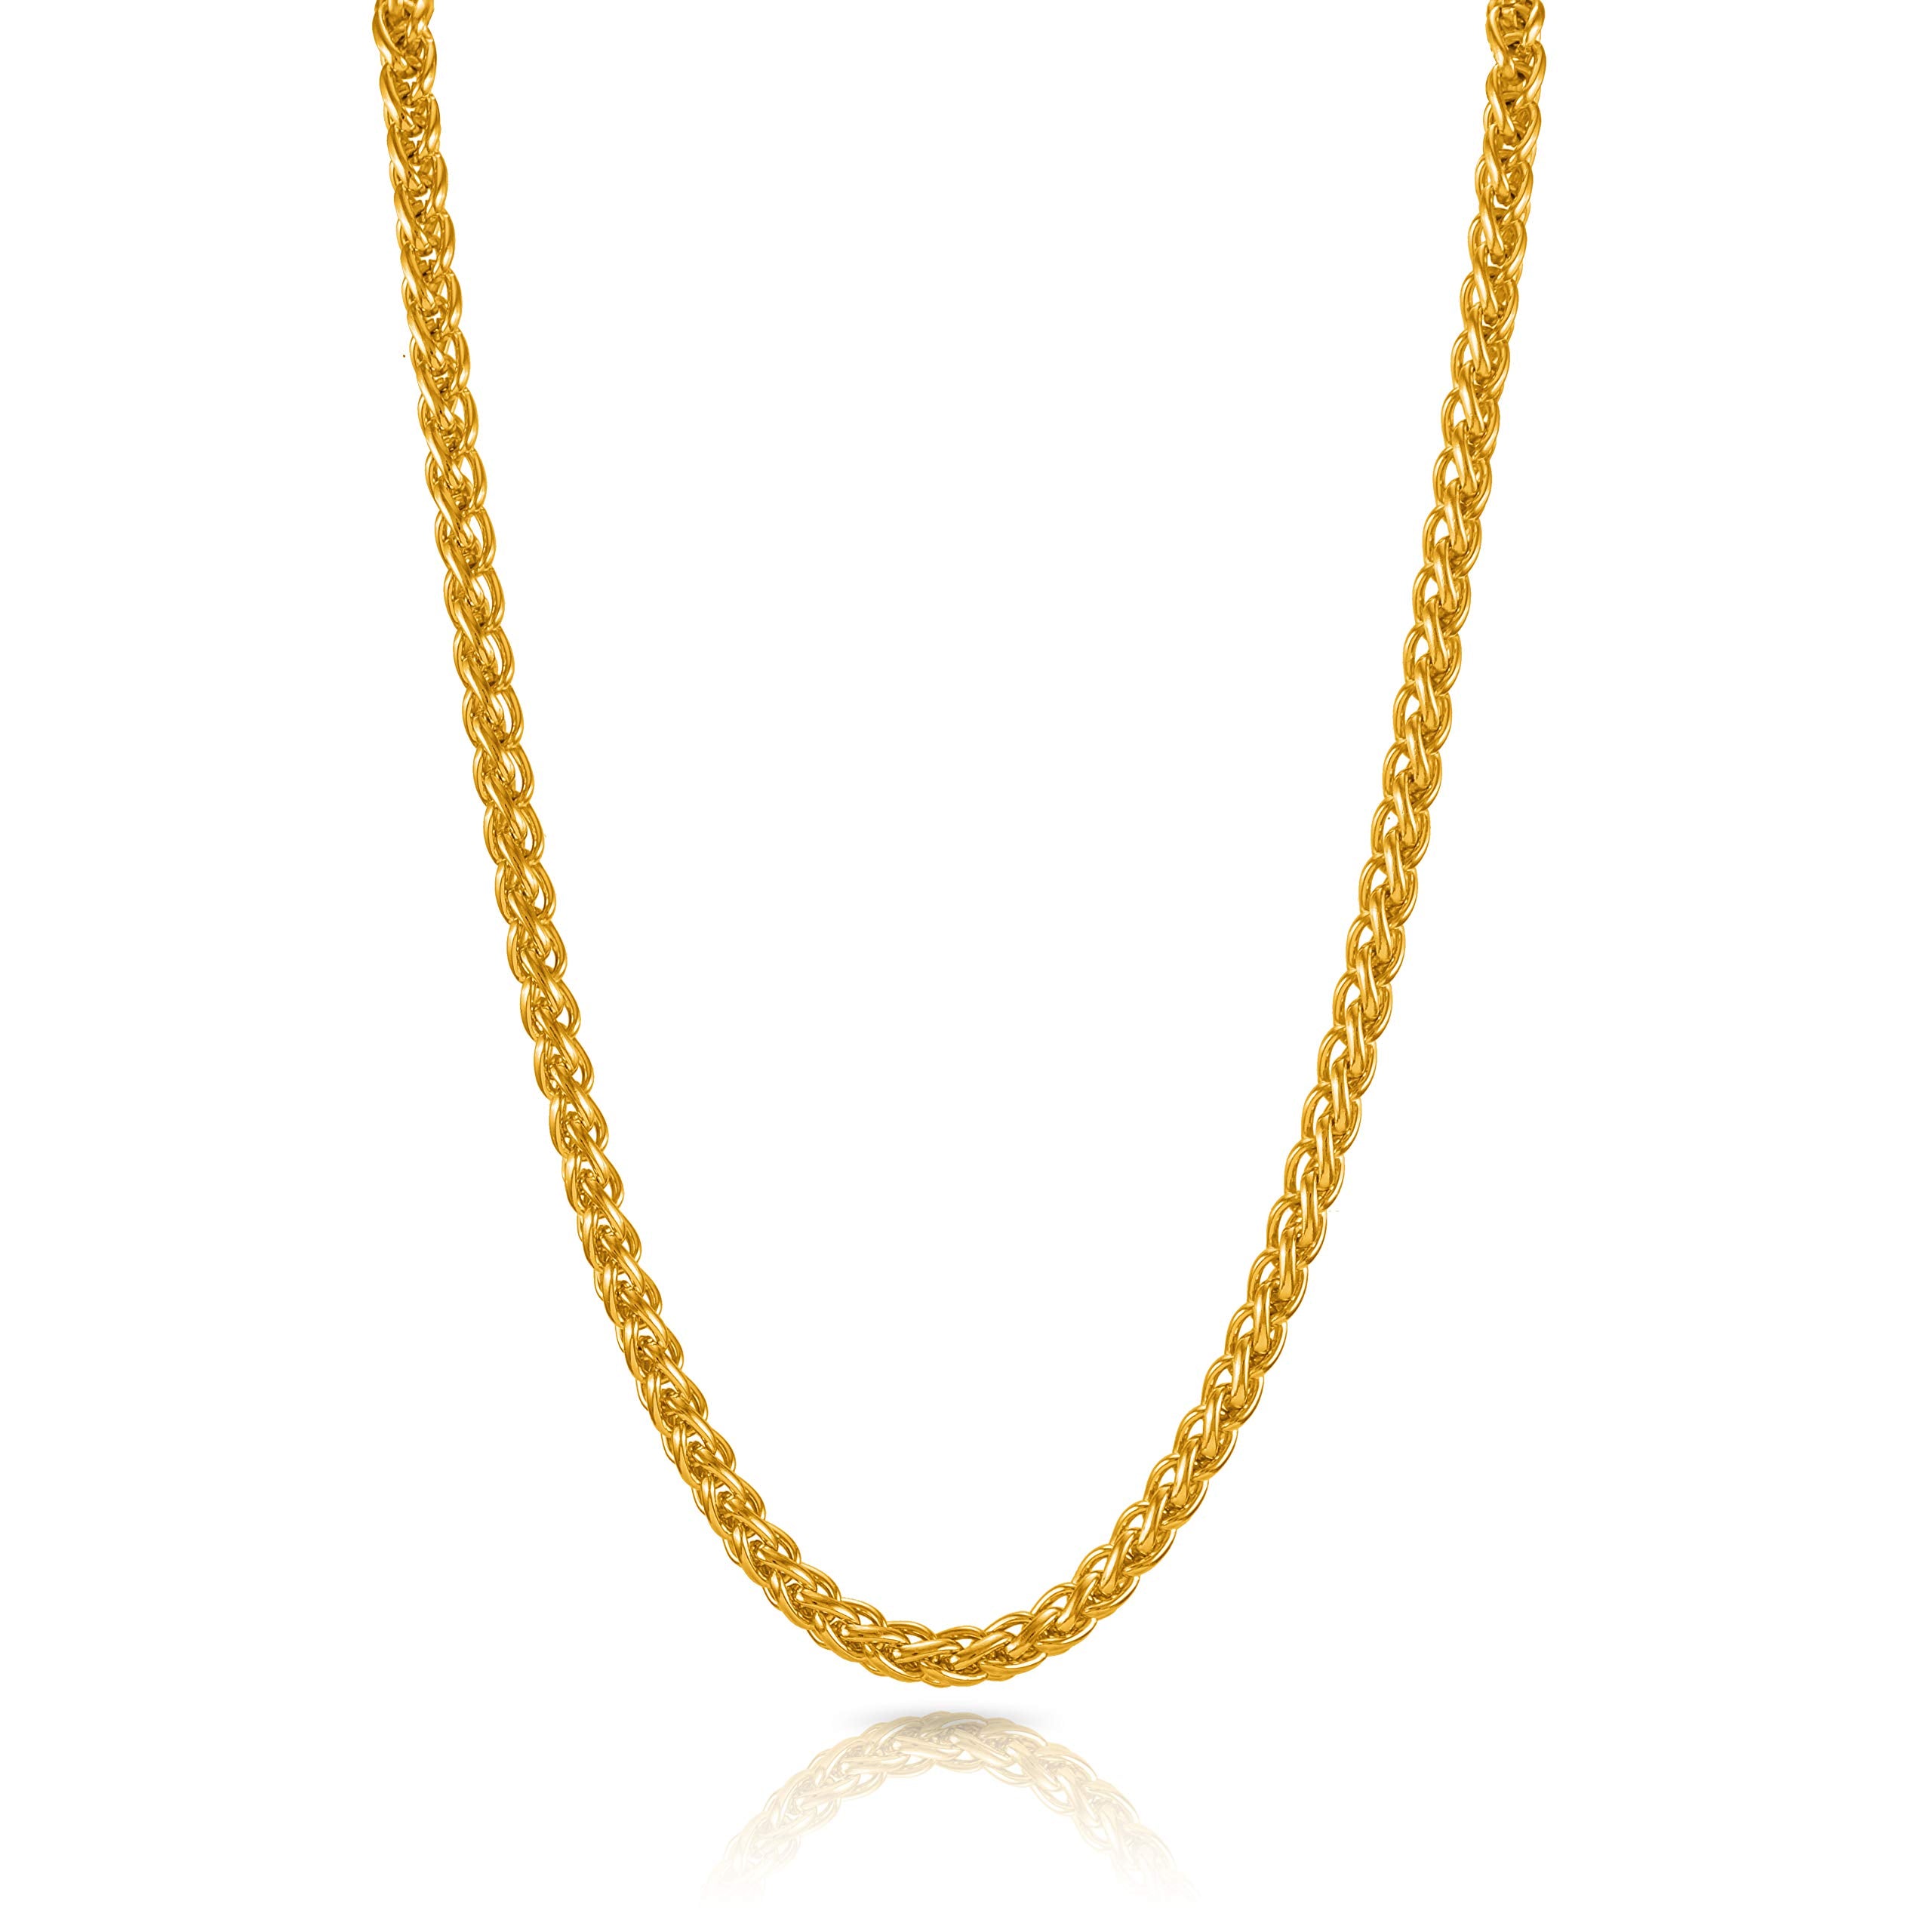 Yellow Chimes Gold-Plated Latest Fashion Thick & Long Trending Design Interlinked Neck Chains For Men and Boys